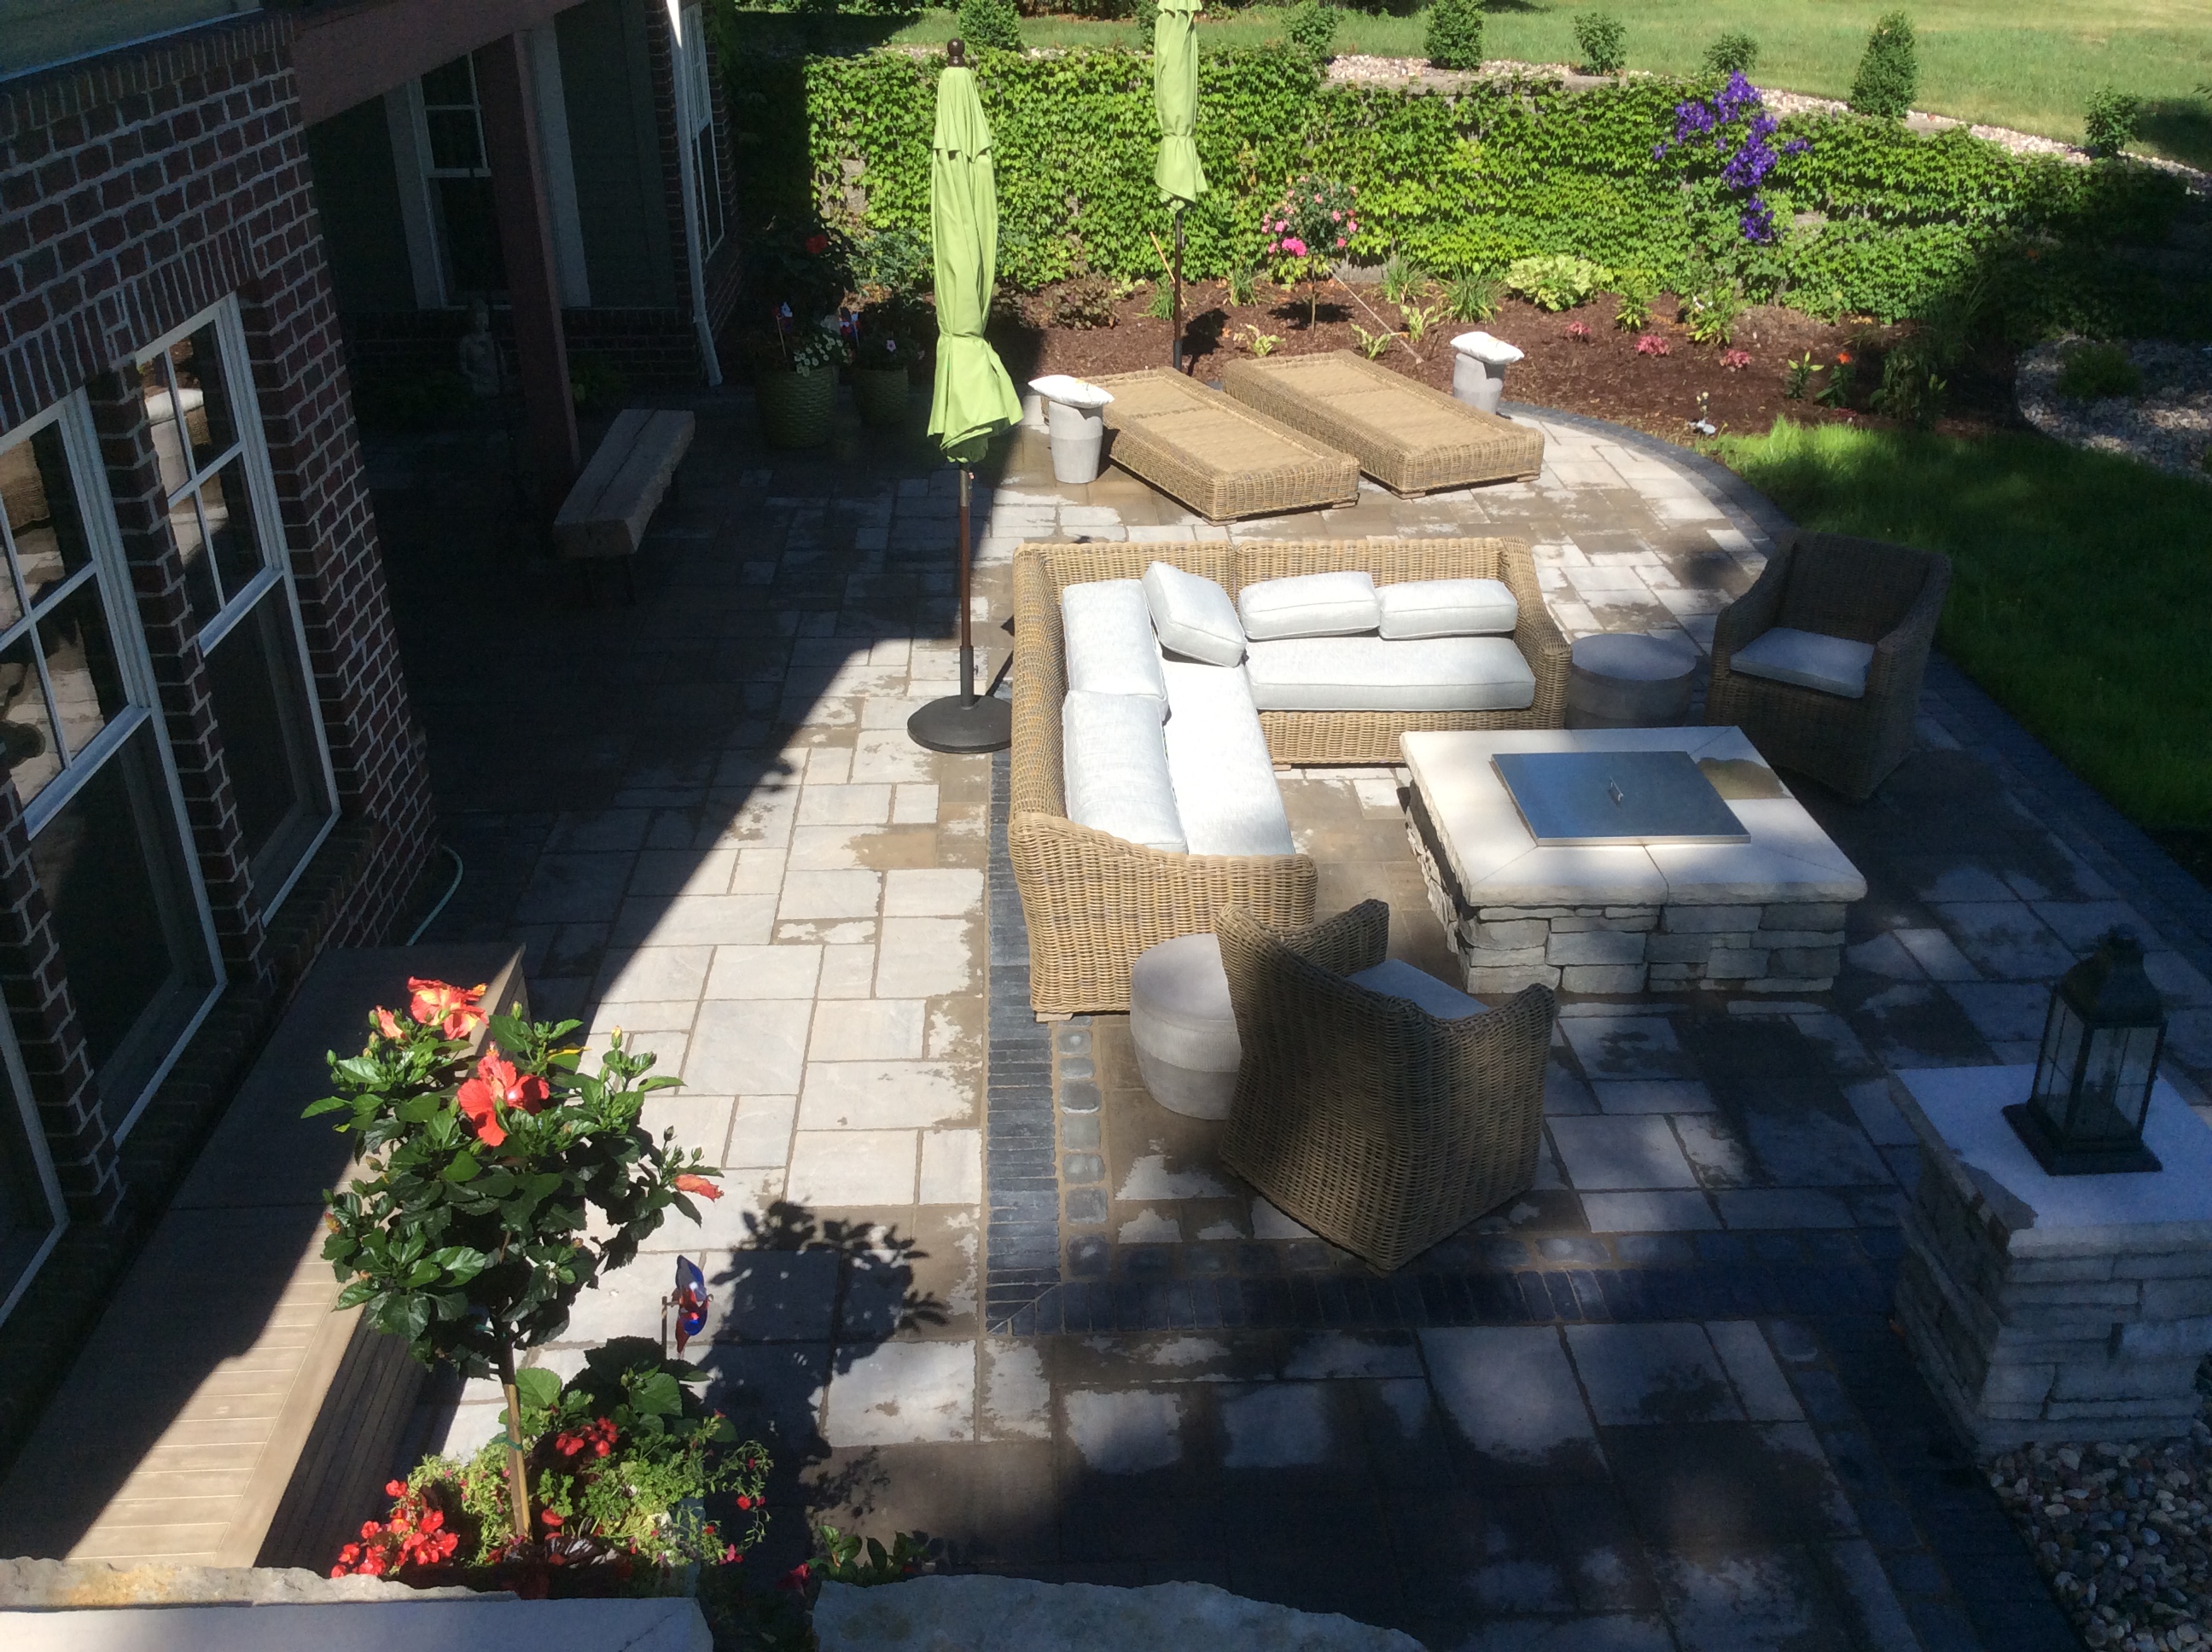 rectangle fire pit in lower patio area with stone bench seating